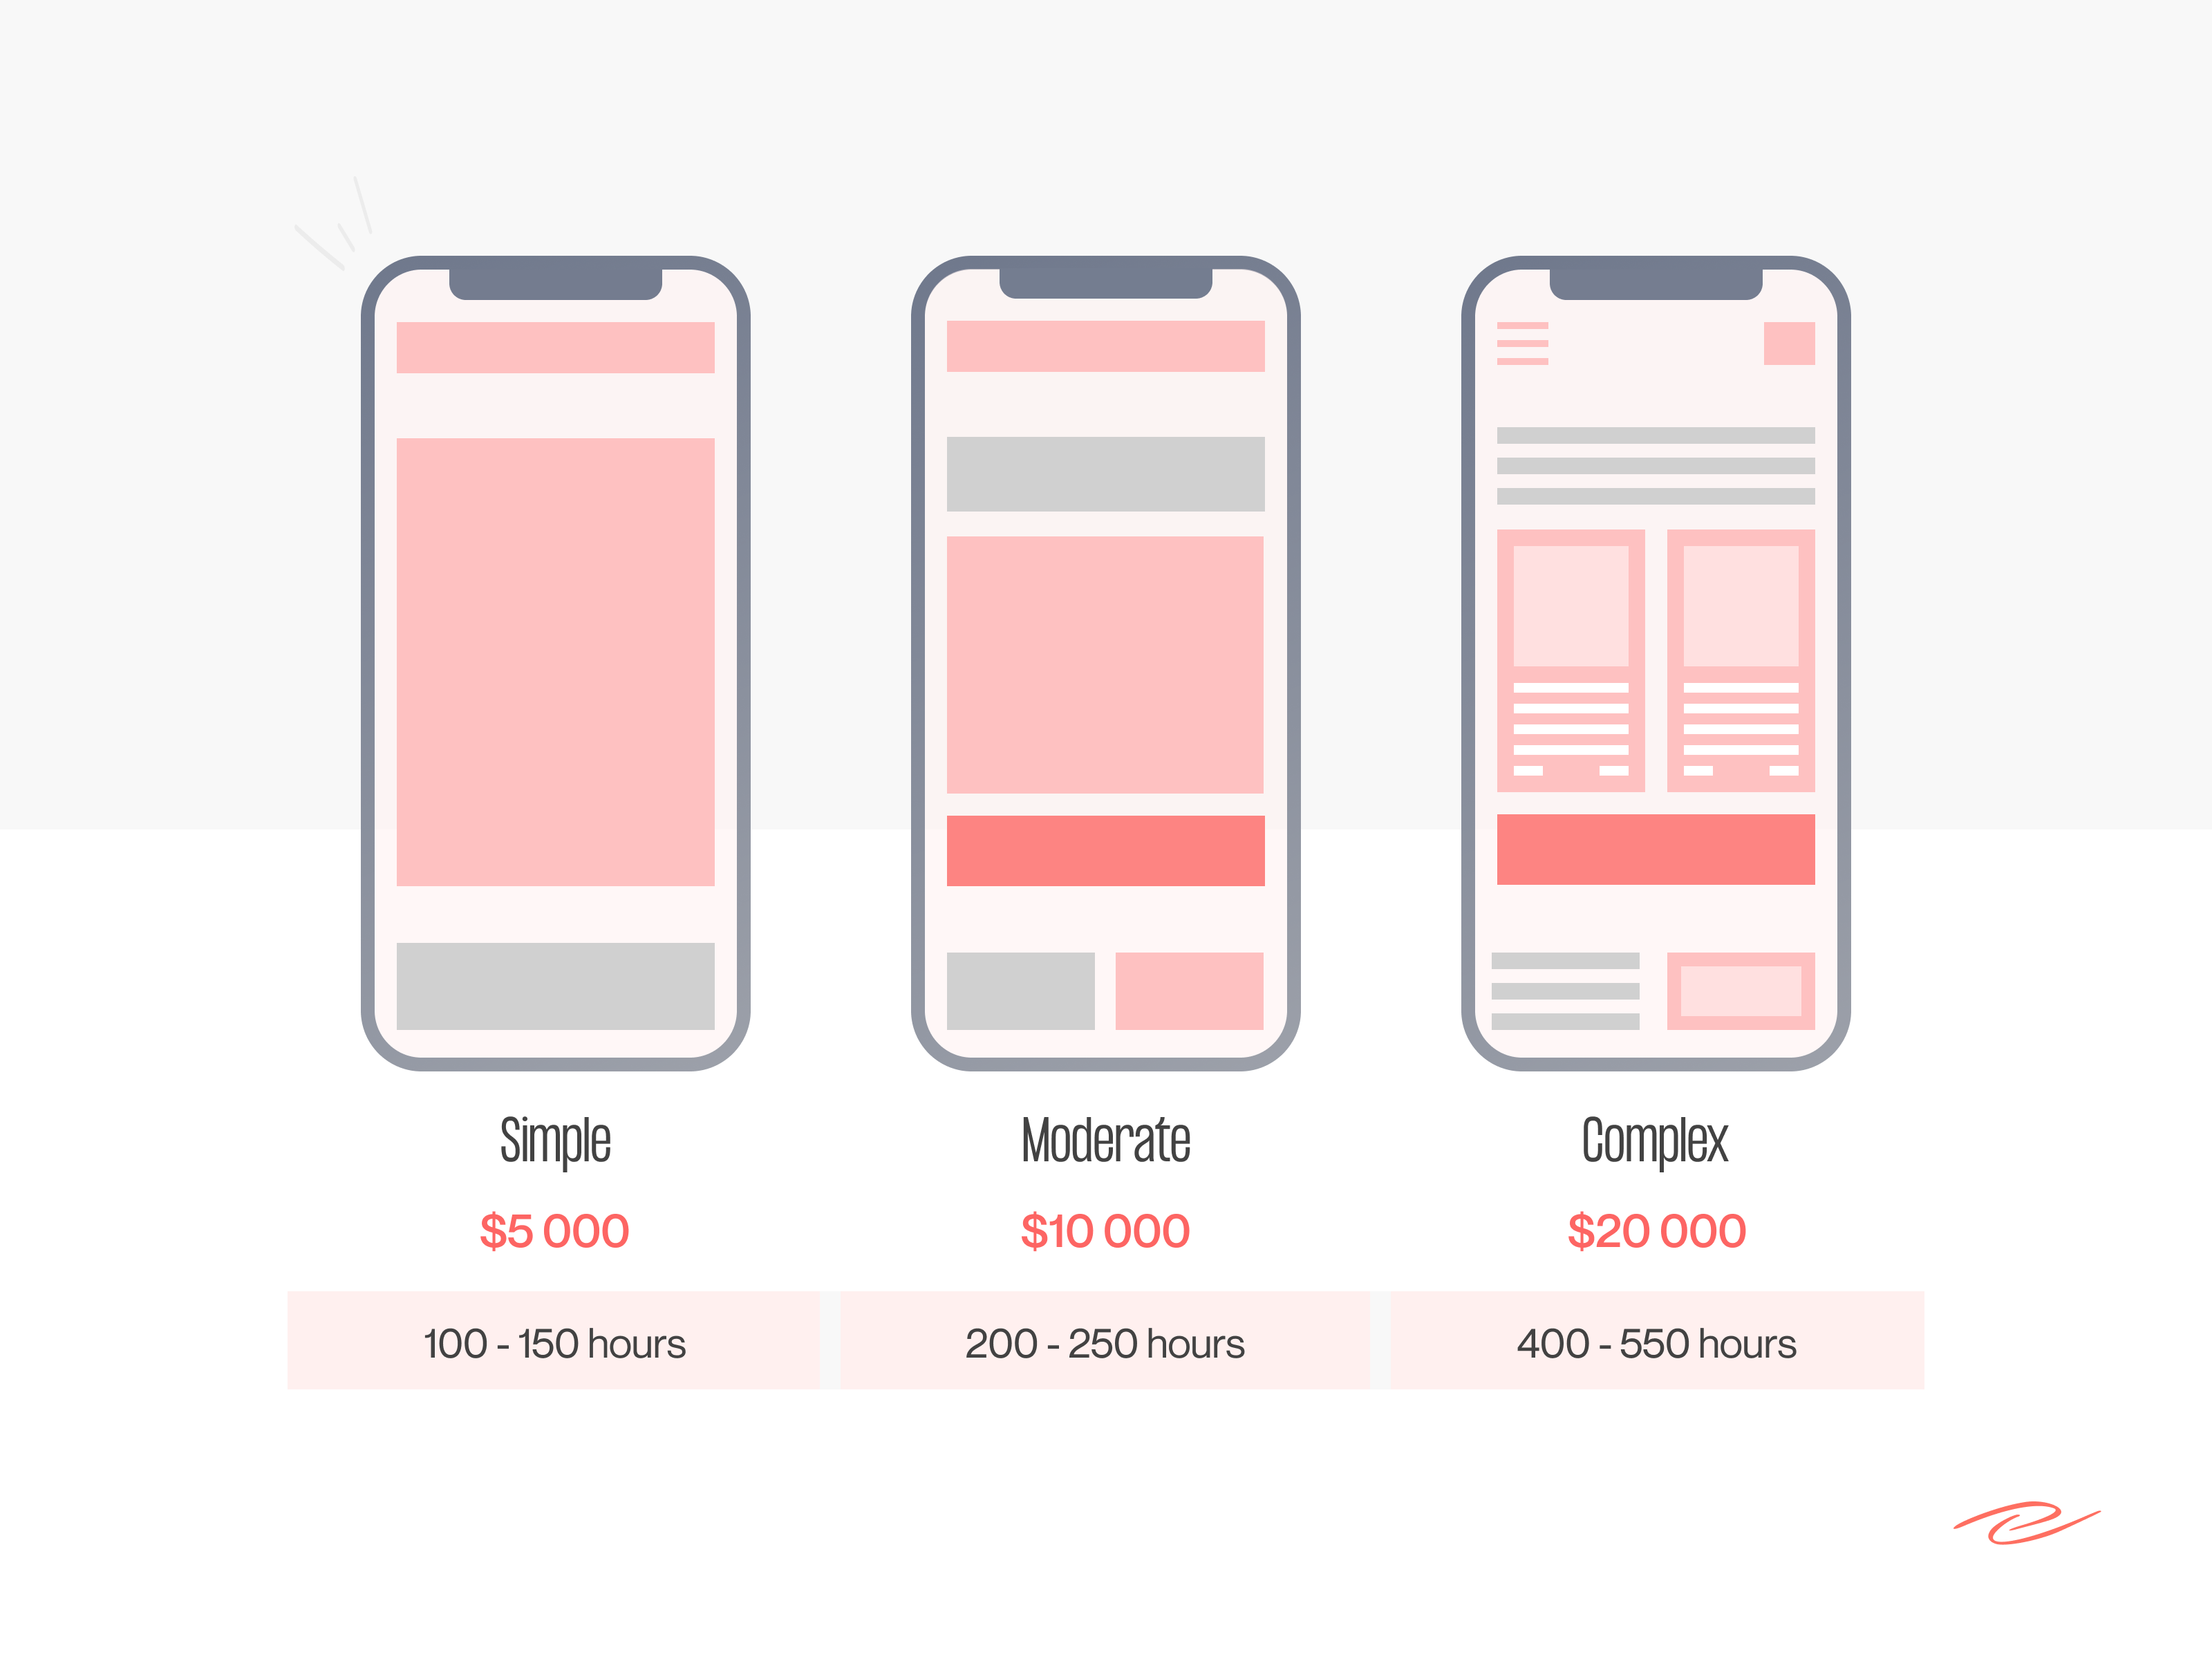 the complexity of creating a mobile app